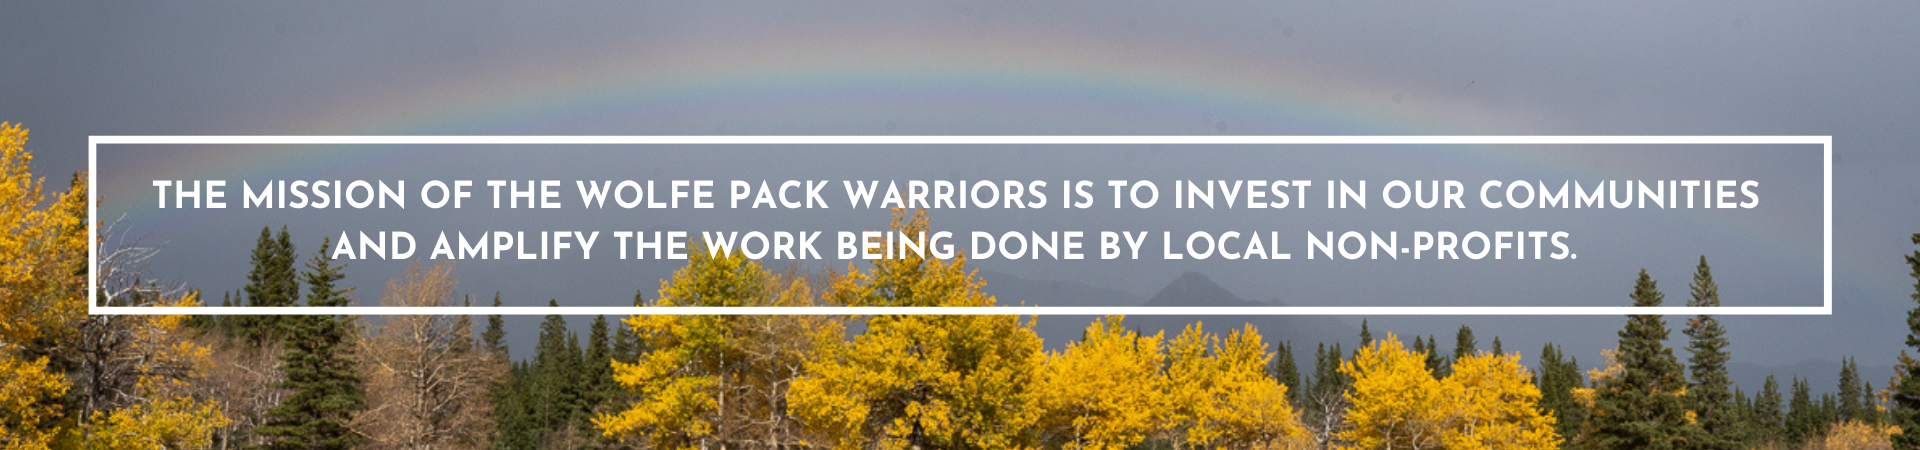 Mission statement of Wolfe Pack Warriors